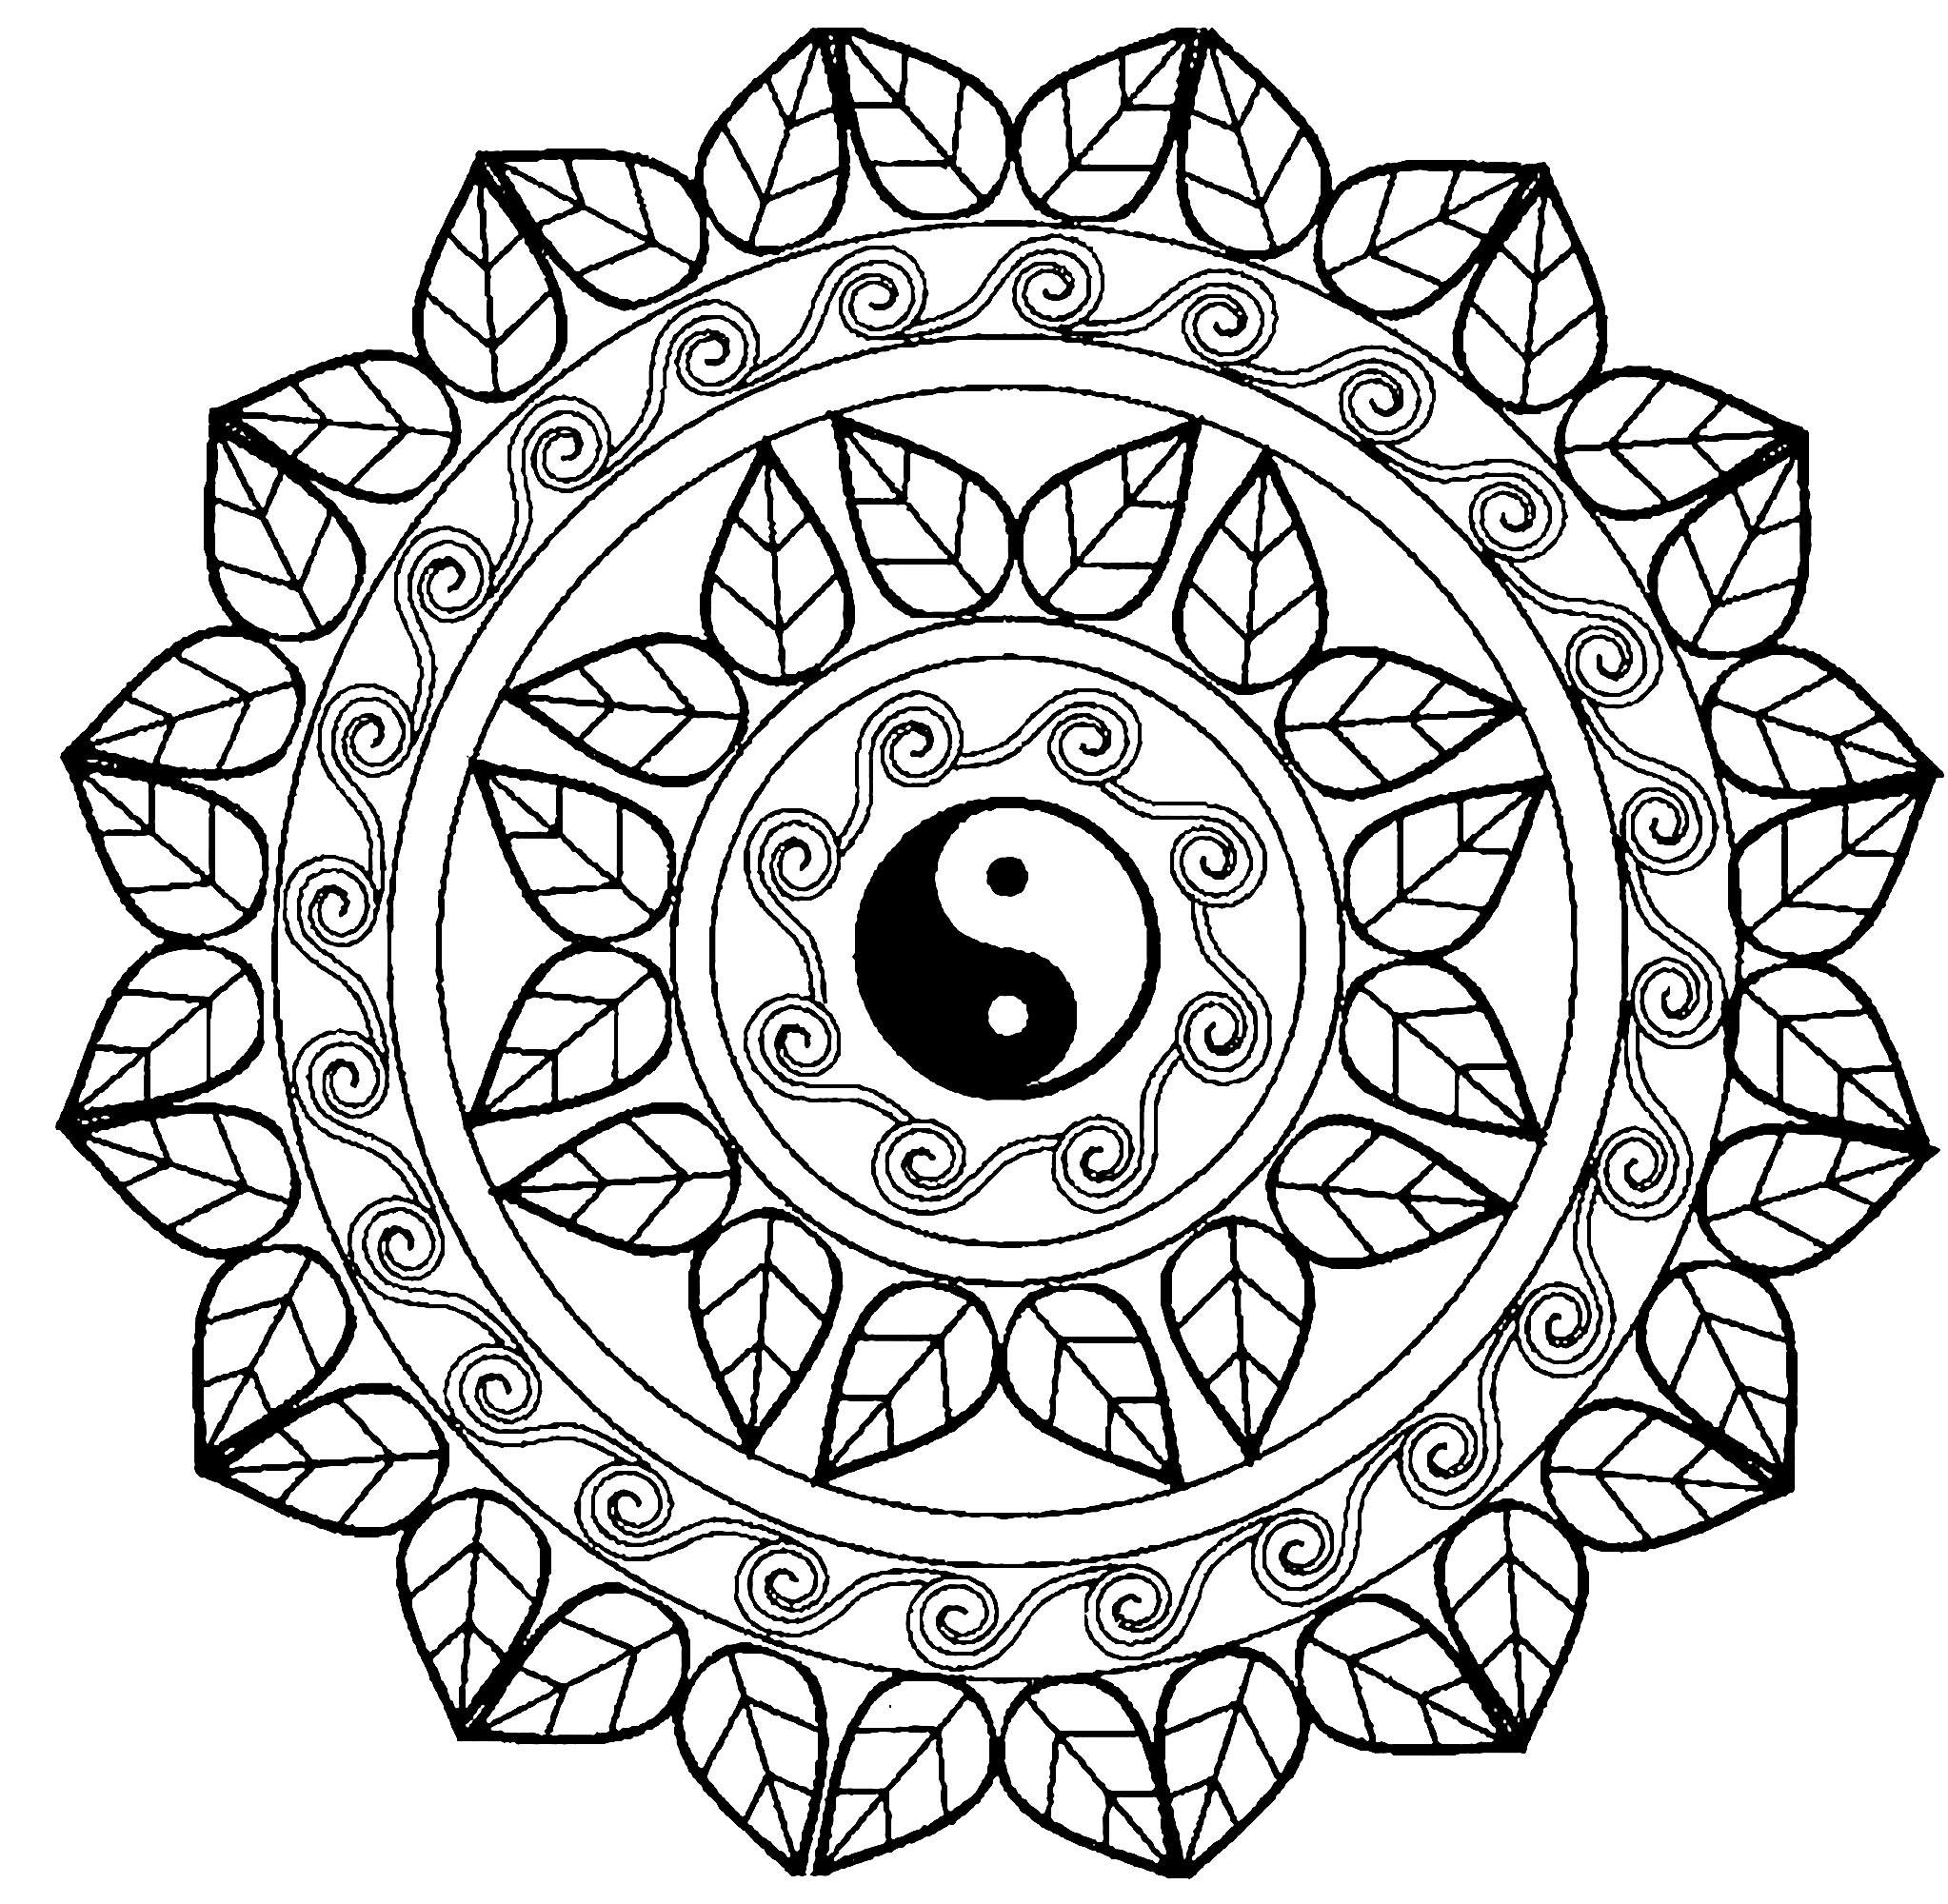 A Mandala coloring page with a lot of details, elegant leaves and in the middle a Yin & Yang symbol ... perfect if you like complex coloring pages, and if you like to express your creativity.